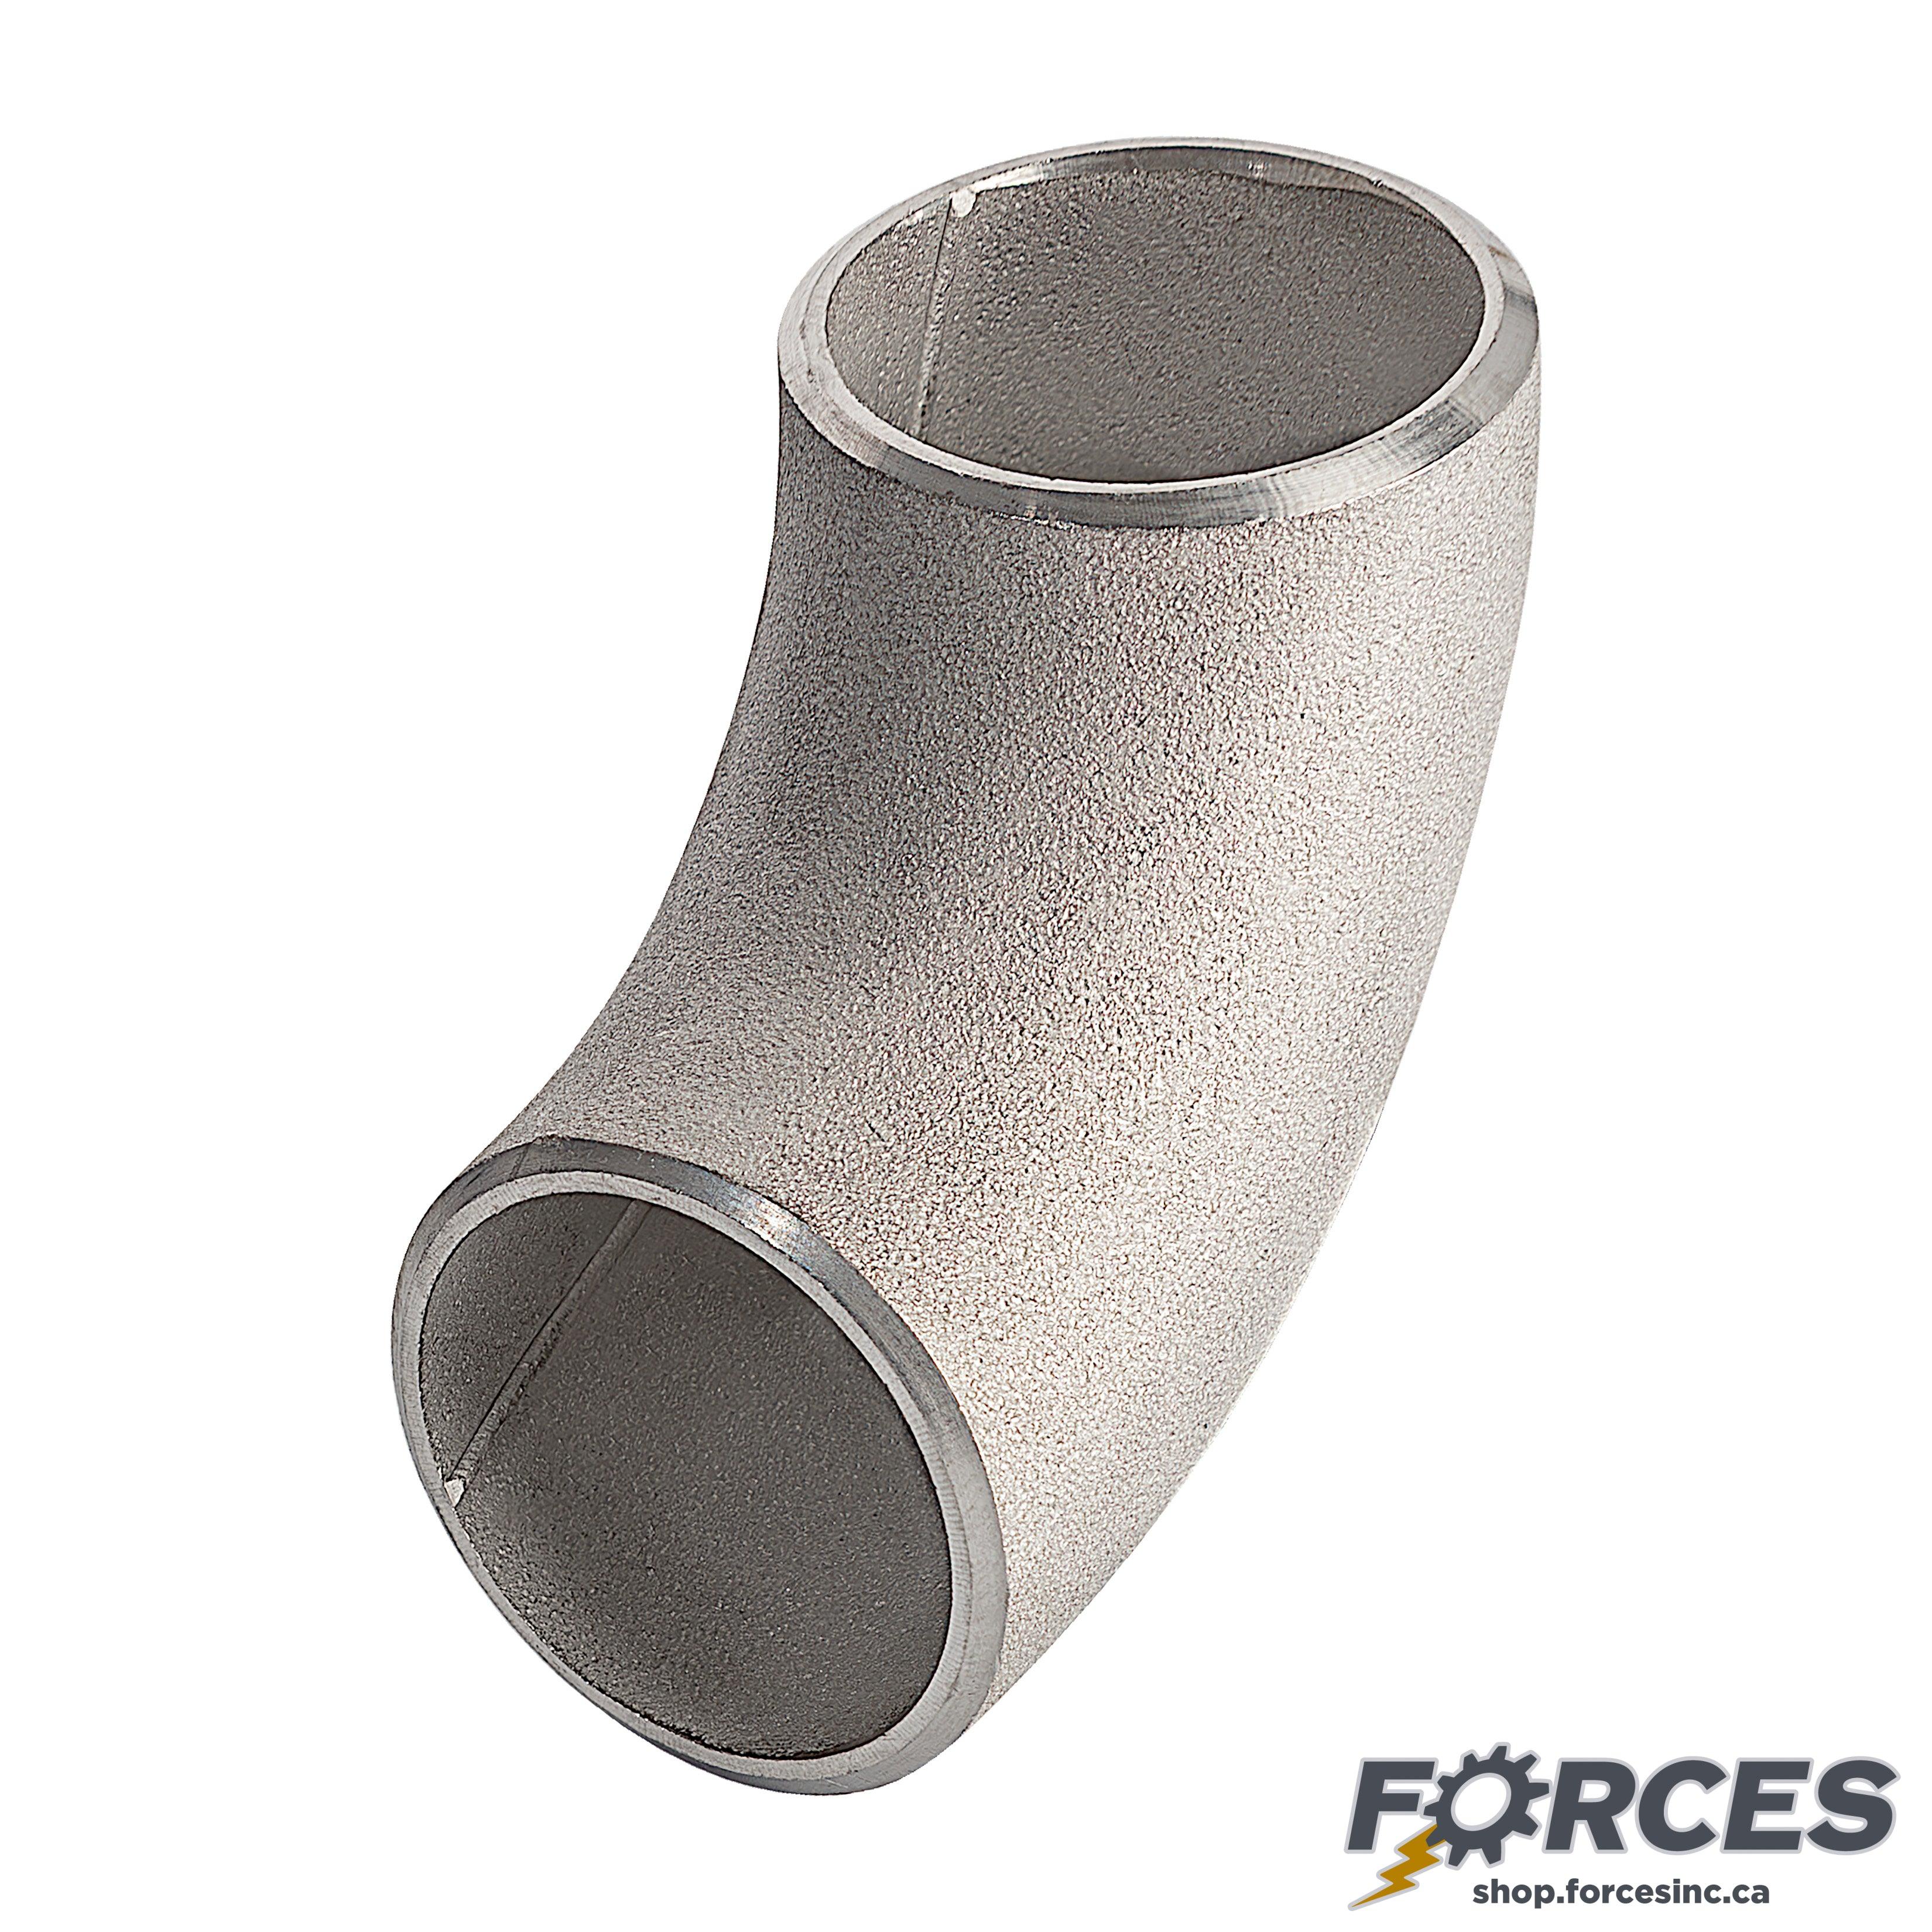 3-1/2" Elbow 90° SCH 40 Butt Weld - Stainless Steel 304 - Forces Inc